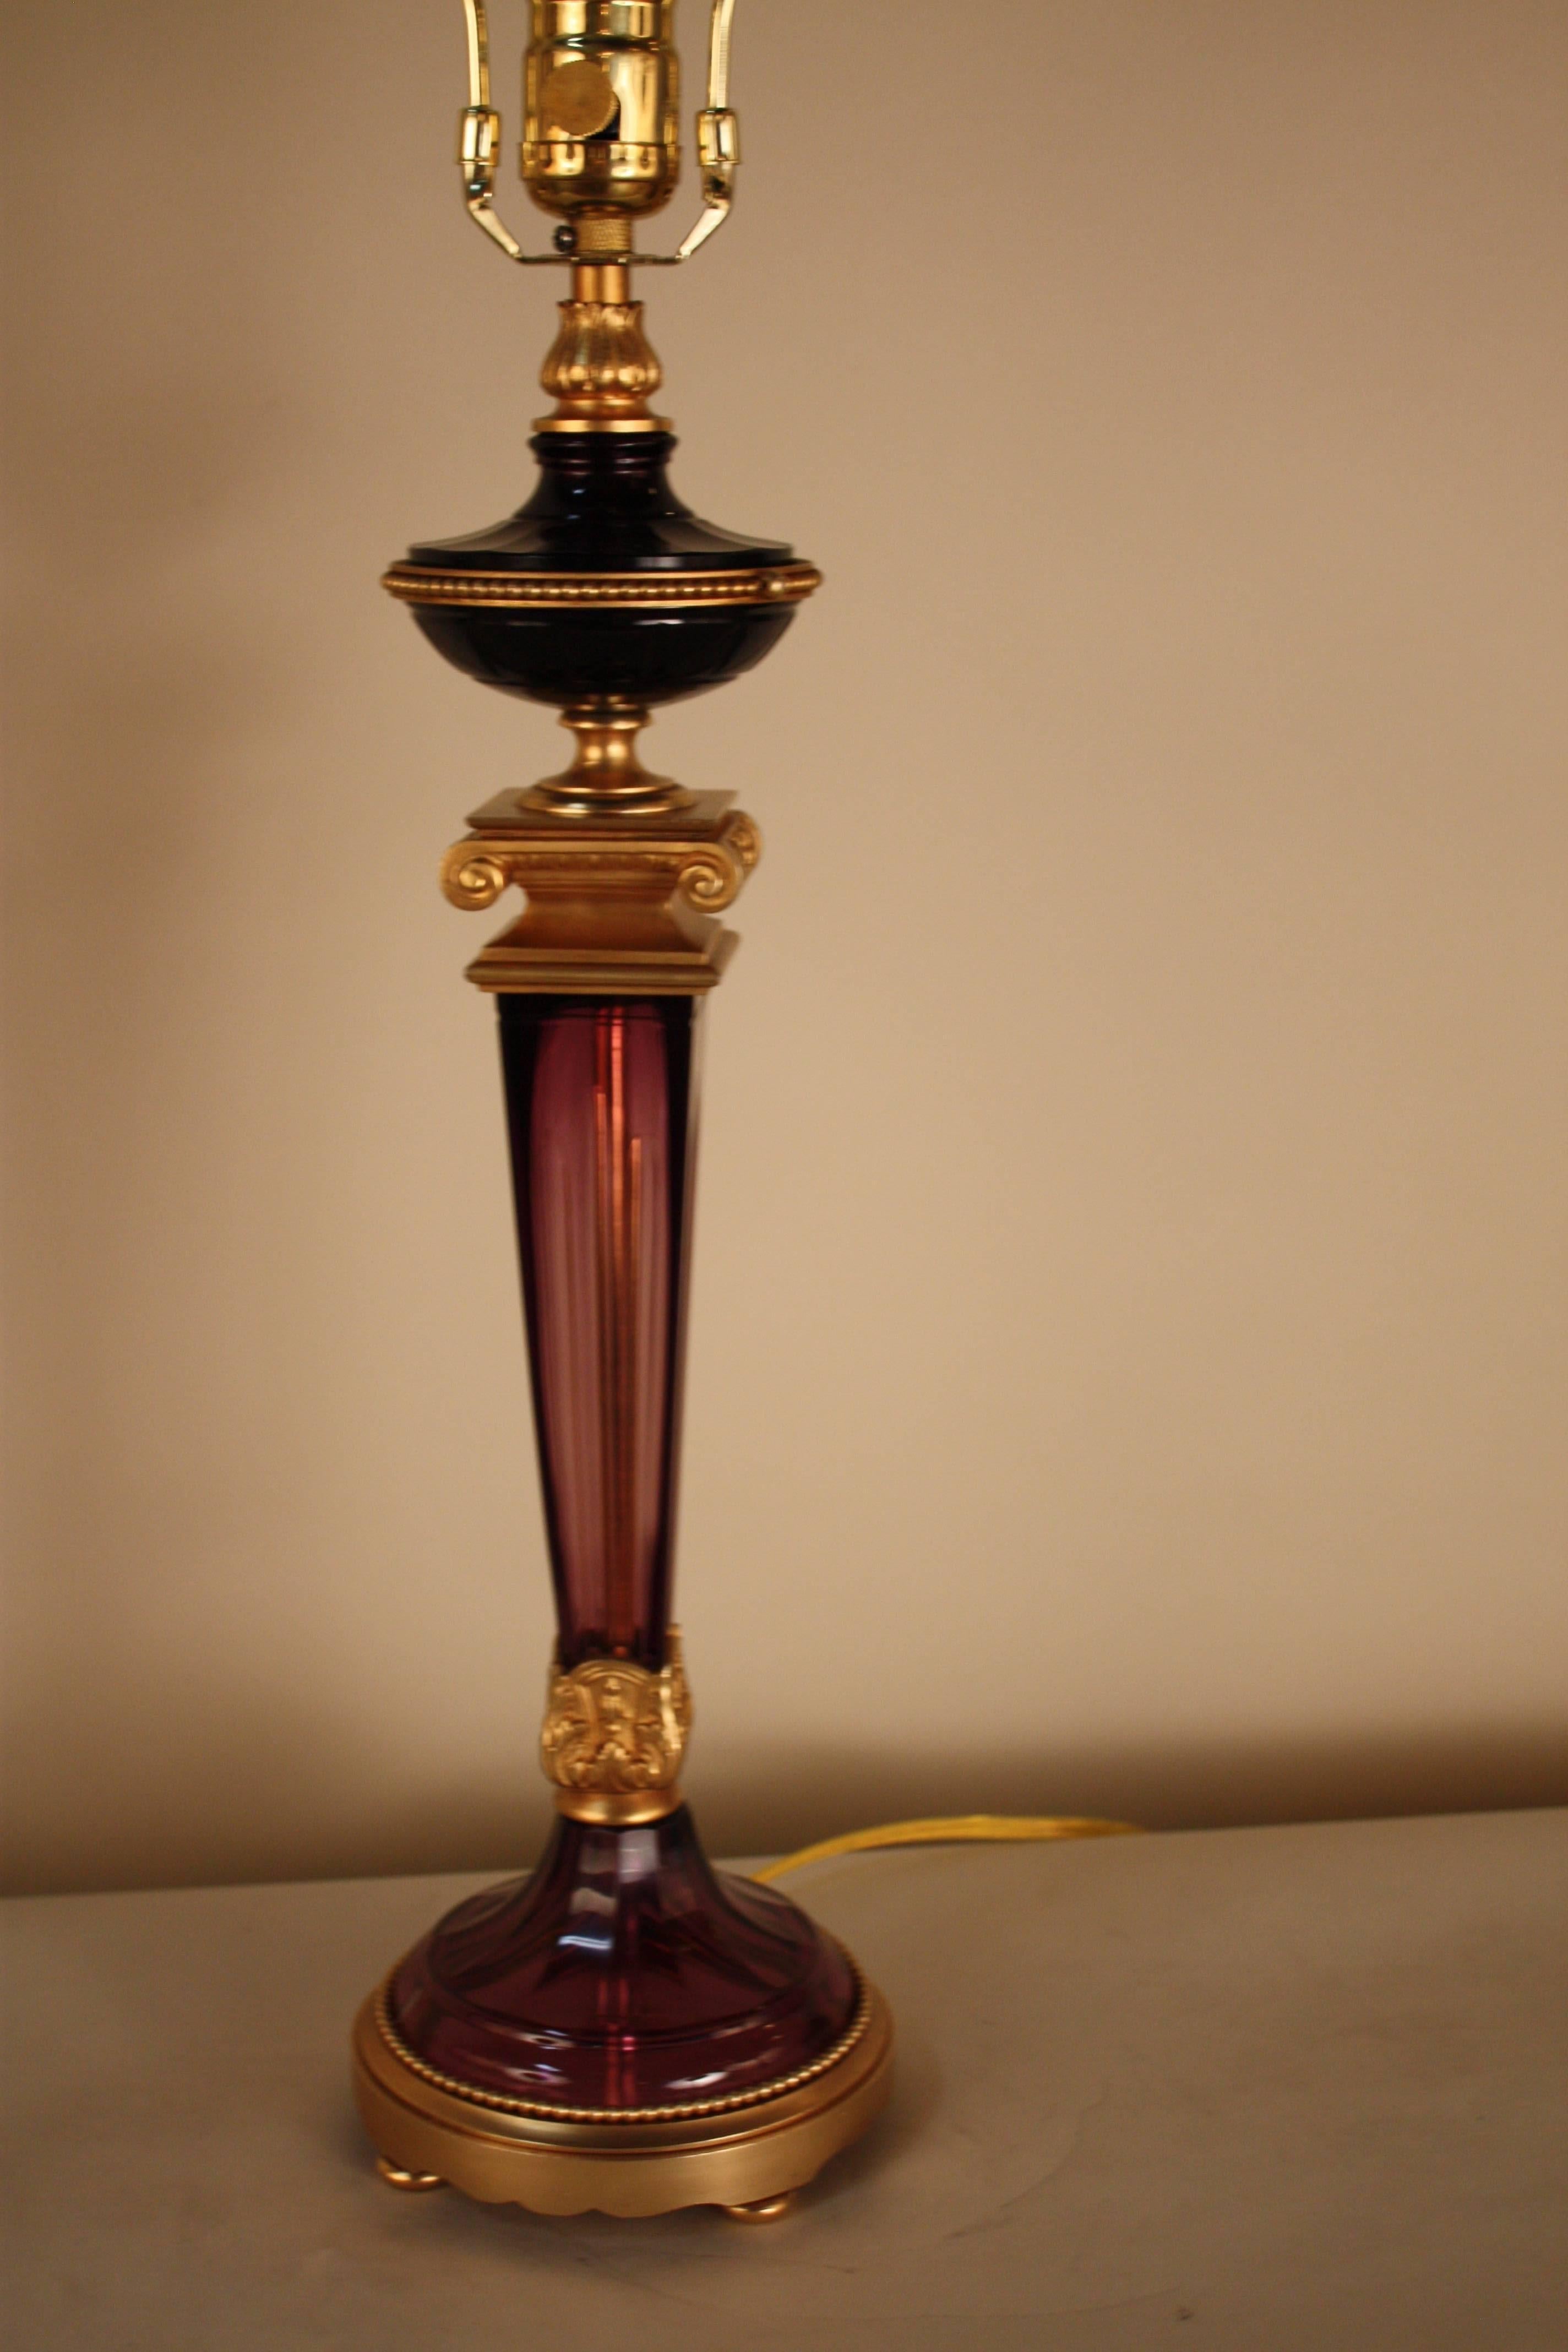 A fantastic 1930s Empire style table purple crystal and bronze doré table lamp.